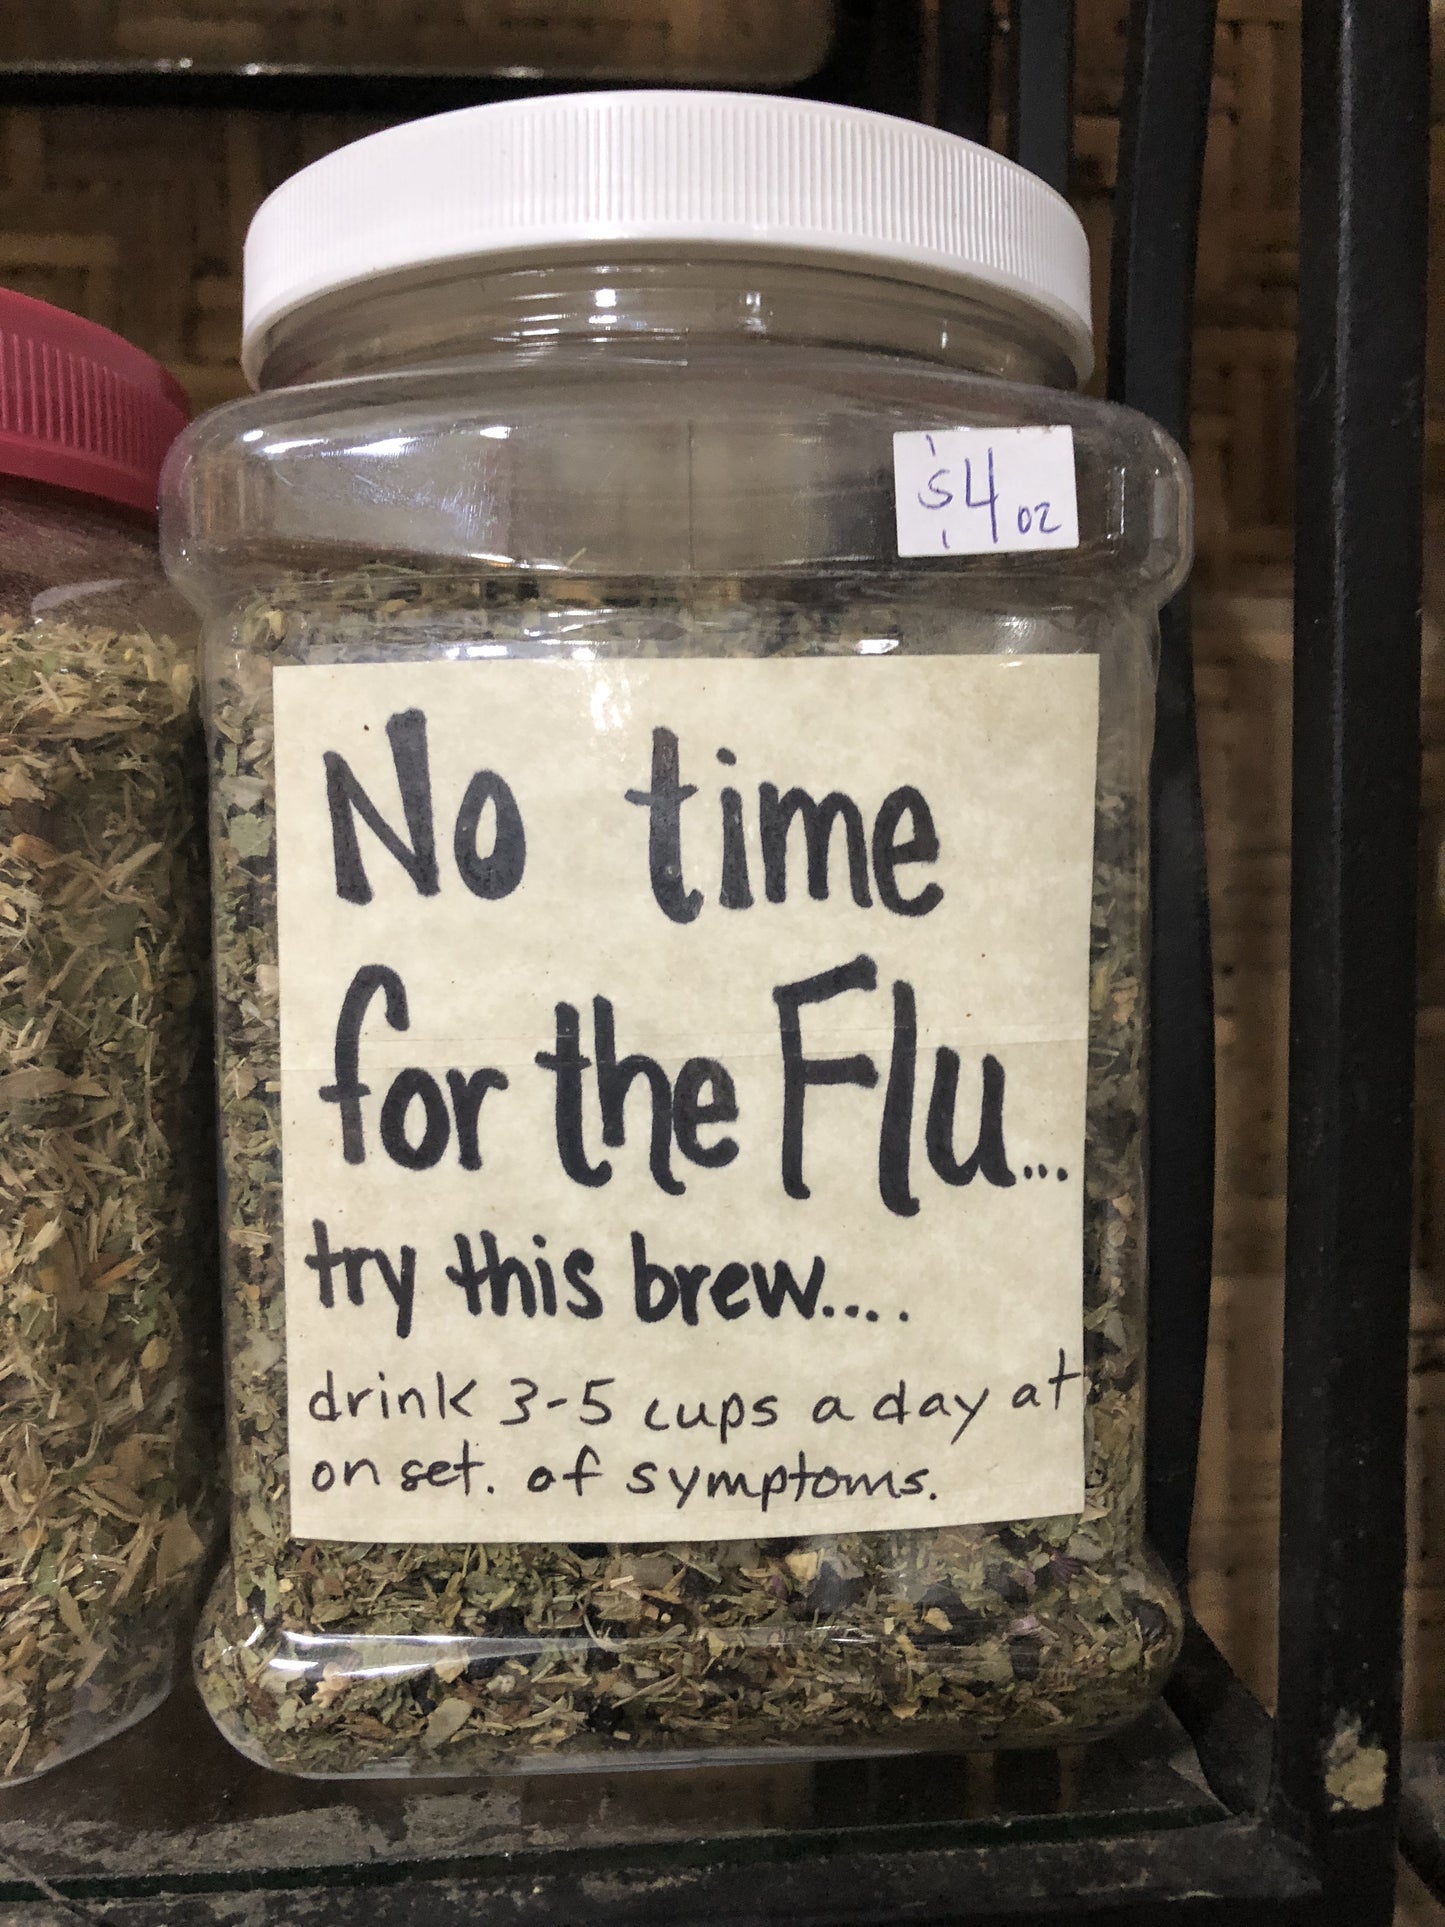 No time for the flu